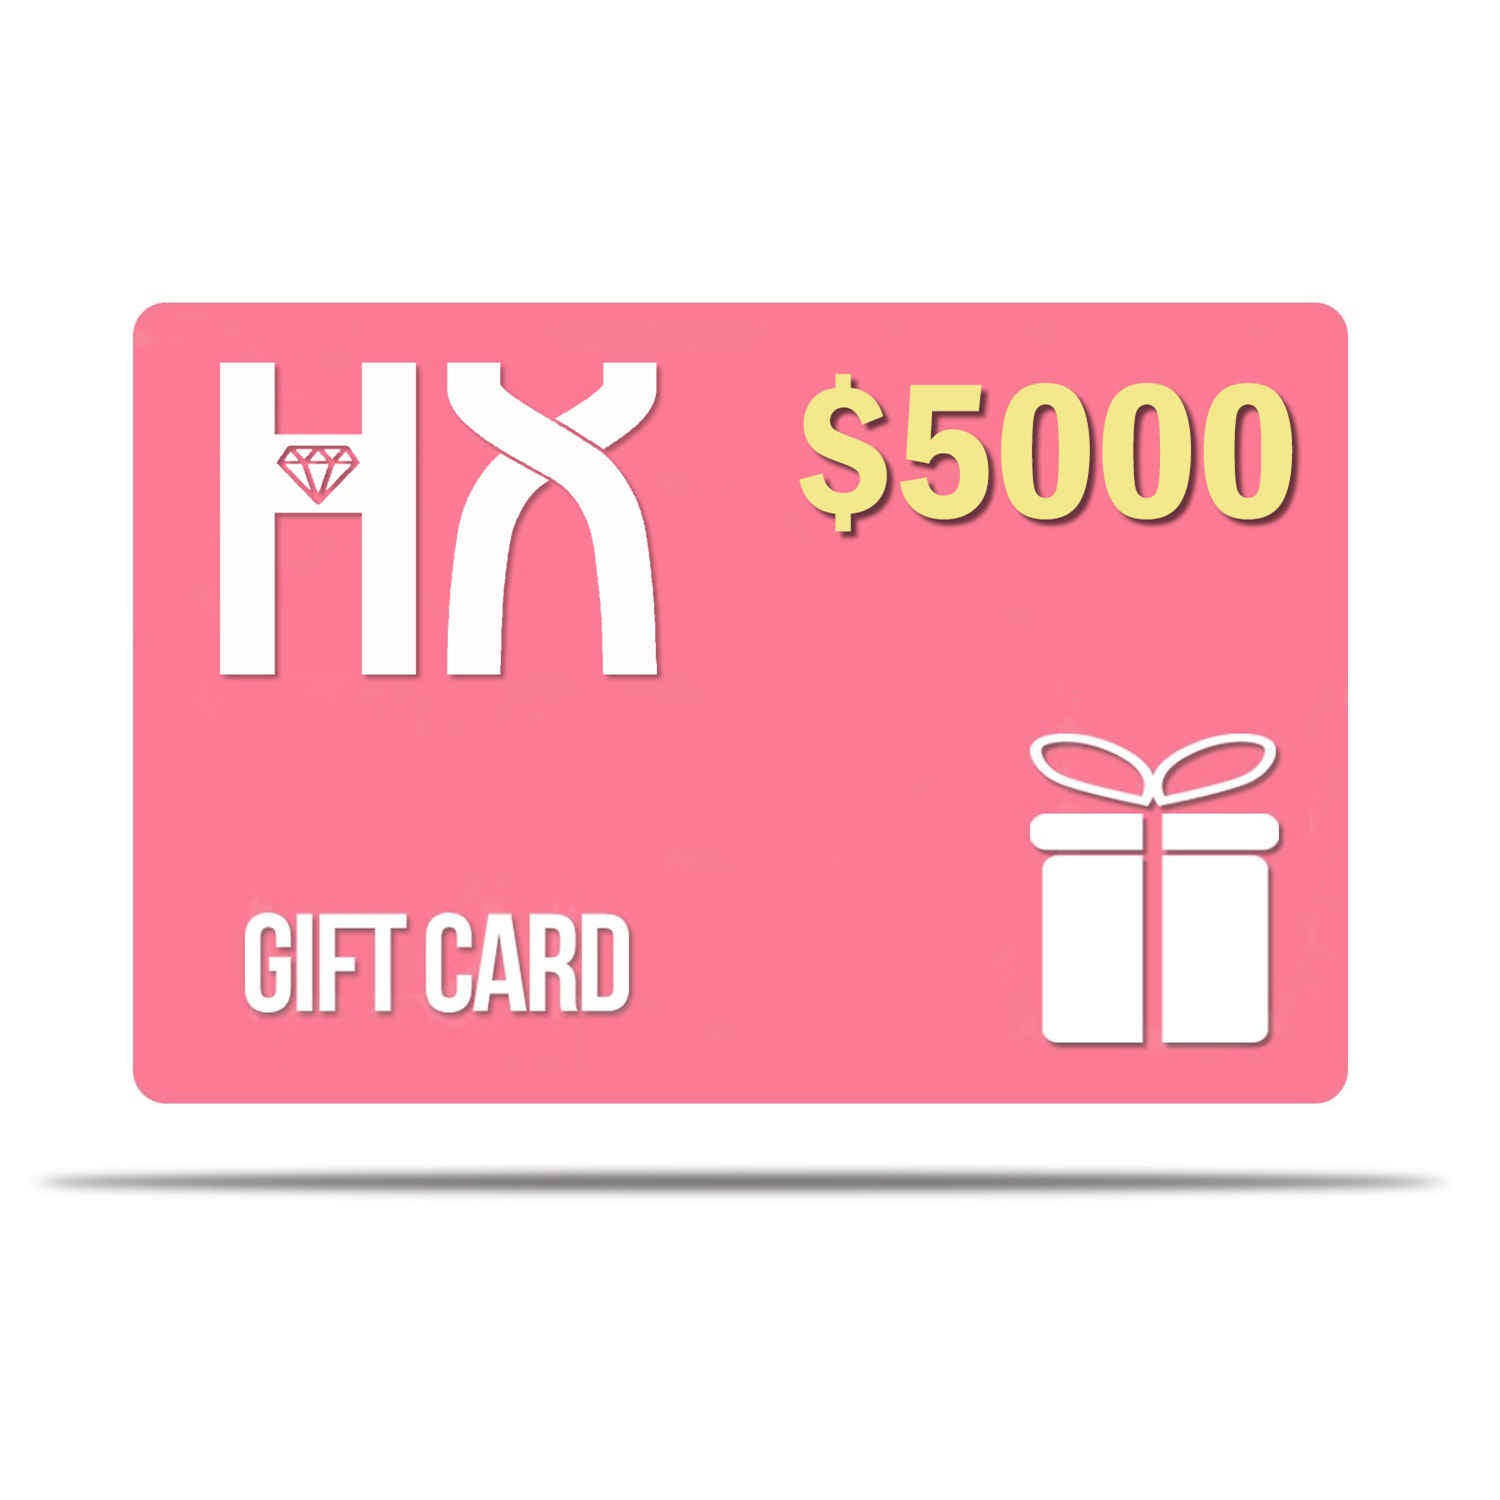 HX Discounted Gift Cards - Save up to 15%!